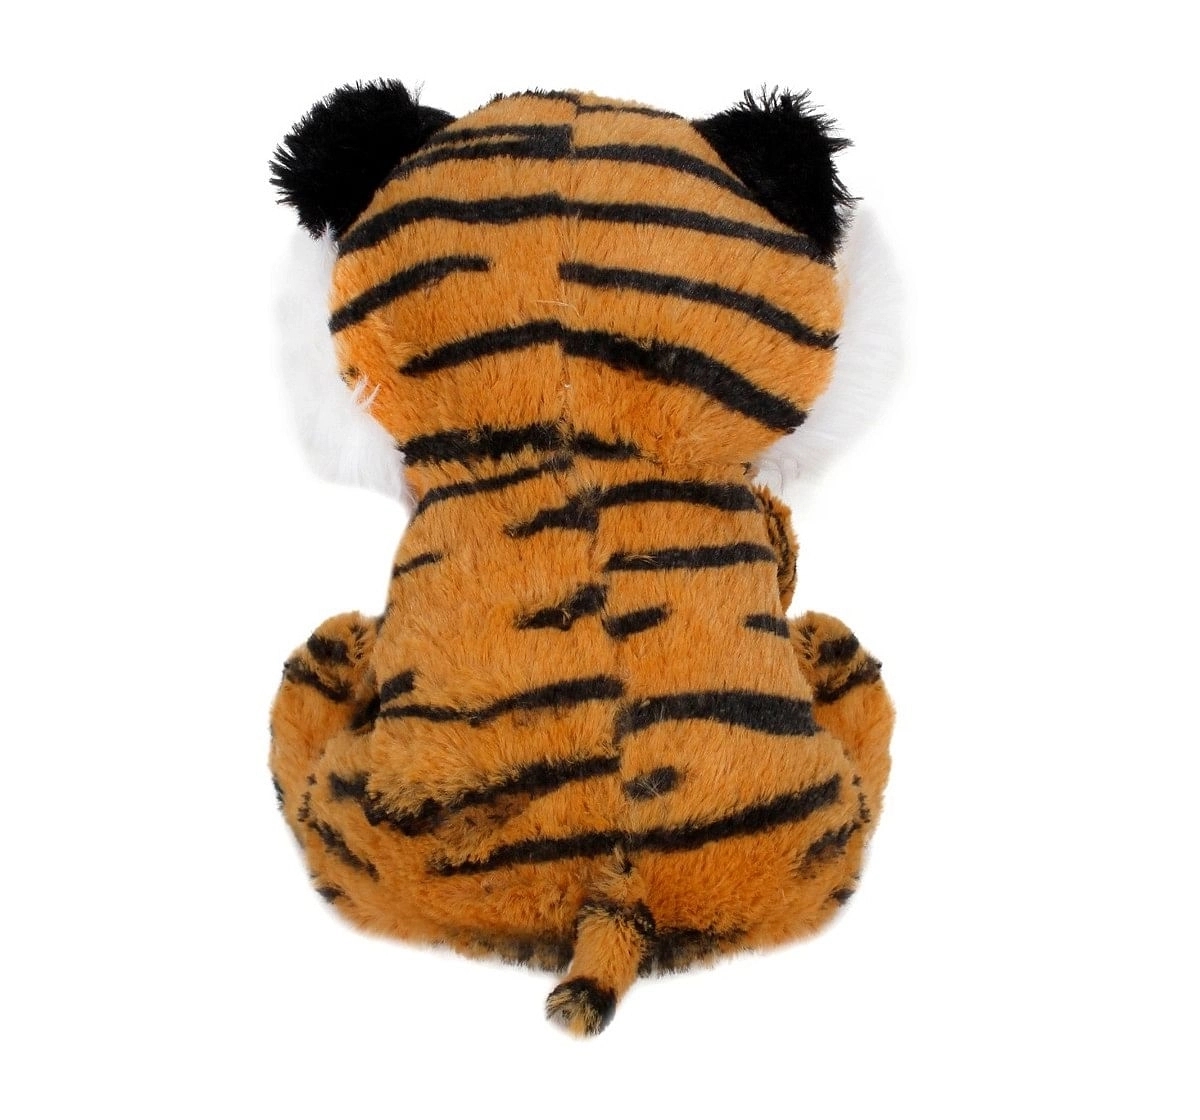 Fuzzbuzz Sitting Tiger - 25Cm Quirky Soft Toys for Kids age 0M+ - 25 Cm (Brown)